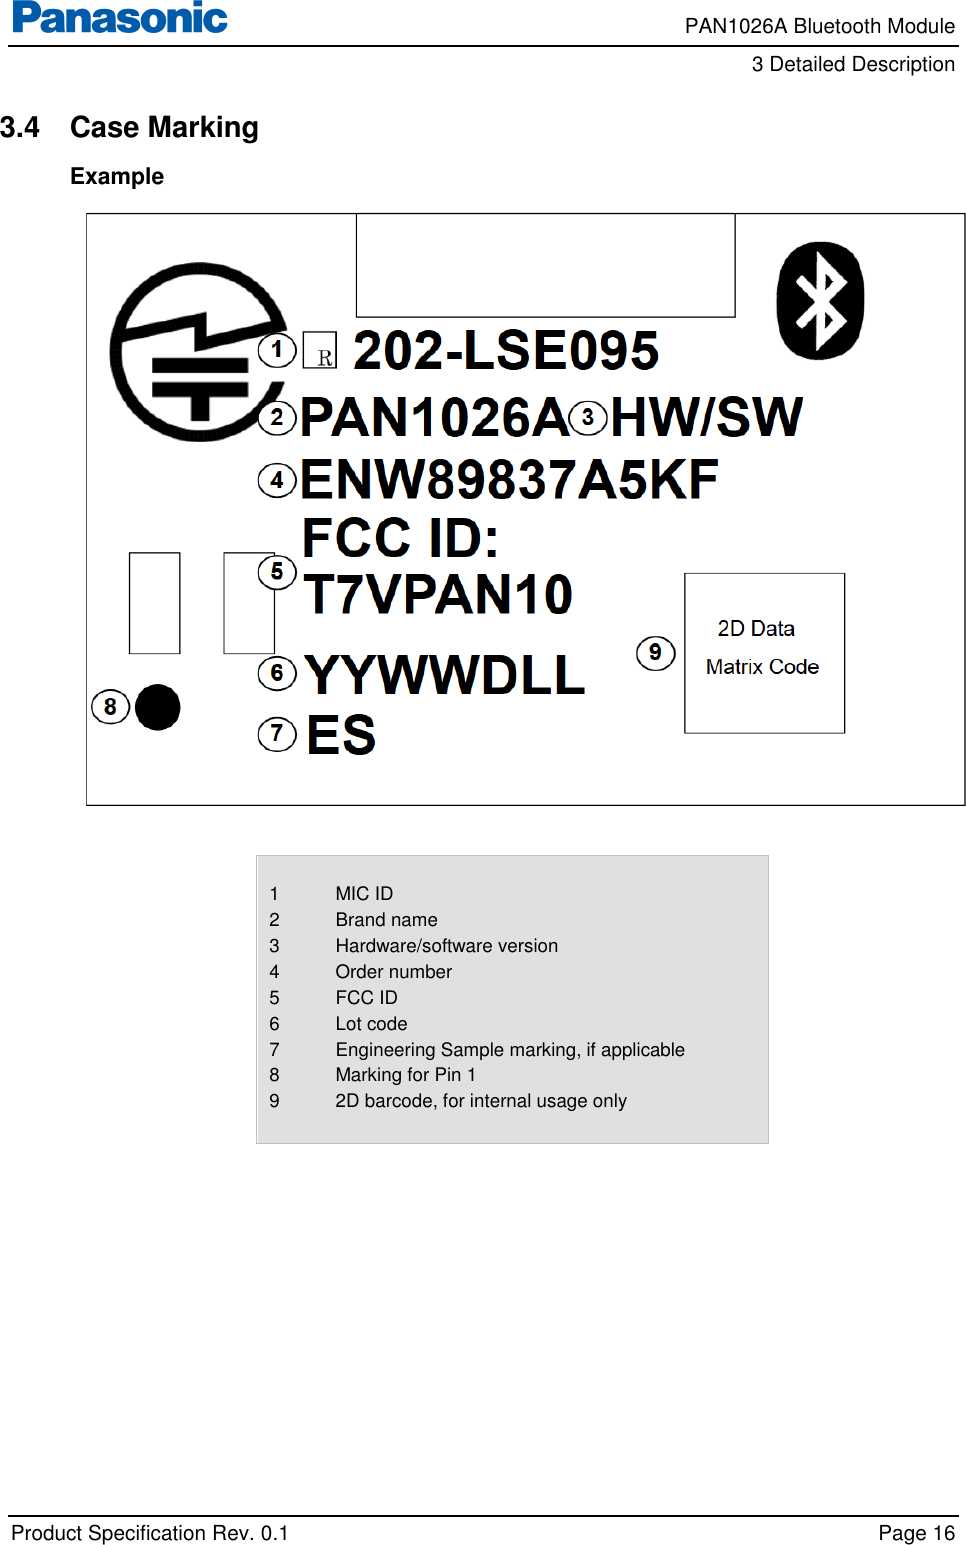     PAN1026A Bluetooth Module         3 Detailed Description    Product Specification Rev. 0.1    Page 16  3.4  Case Marking Example    1 2 3 4 5 6 7 8 9   MIC ID Brand name Hardware/software version Order number FCC ID Lot code Engineering Sample marking, if applicable Marking for Pin 1 2D barcode, for internal usage only   